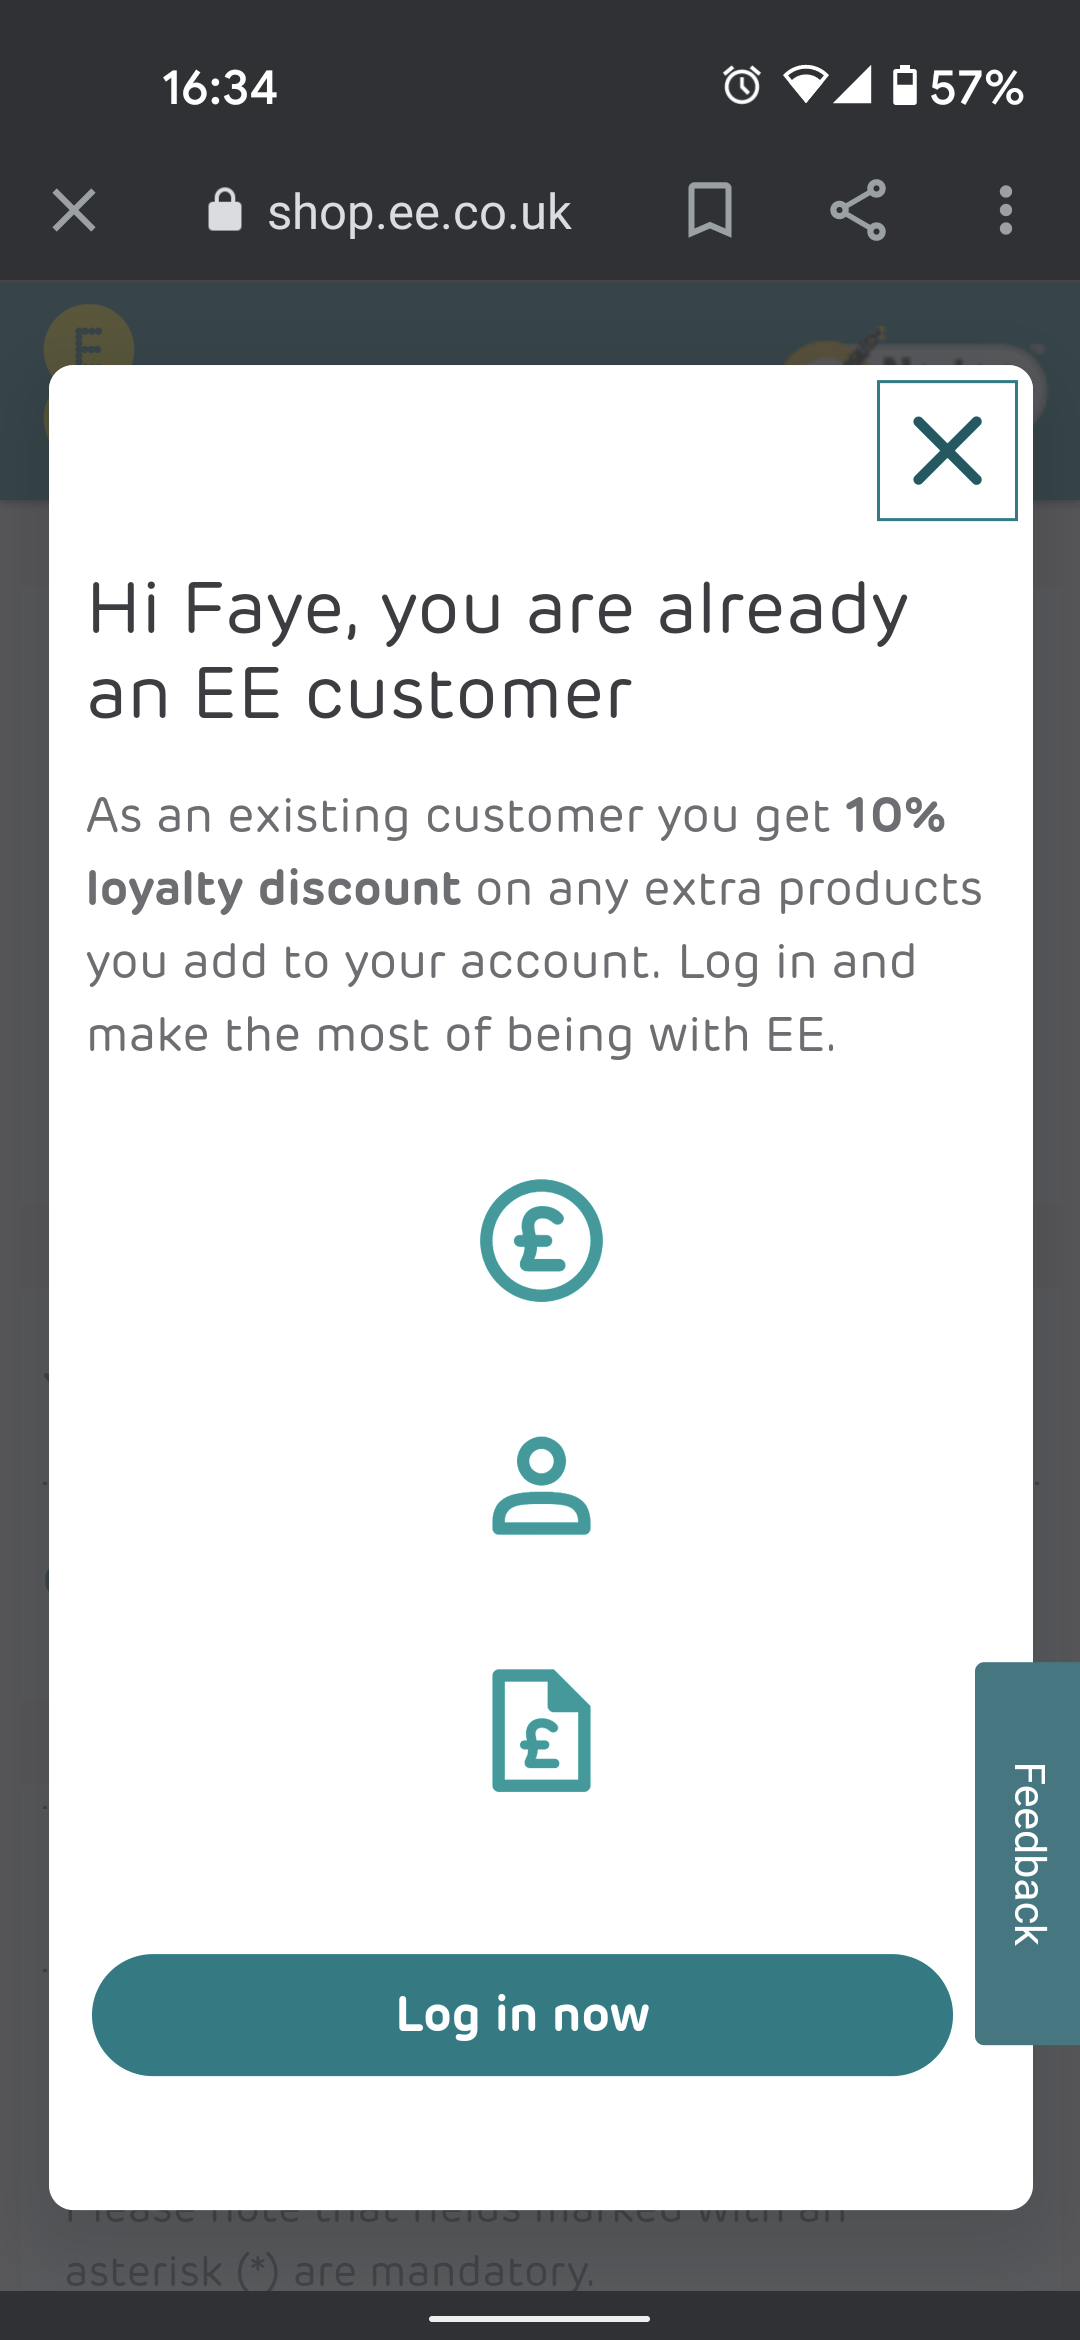 Returned in 14 days for exchange - The EE Community